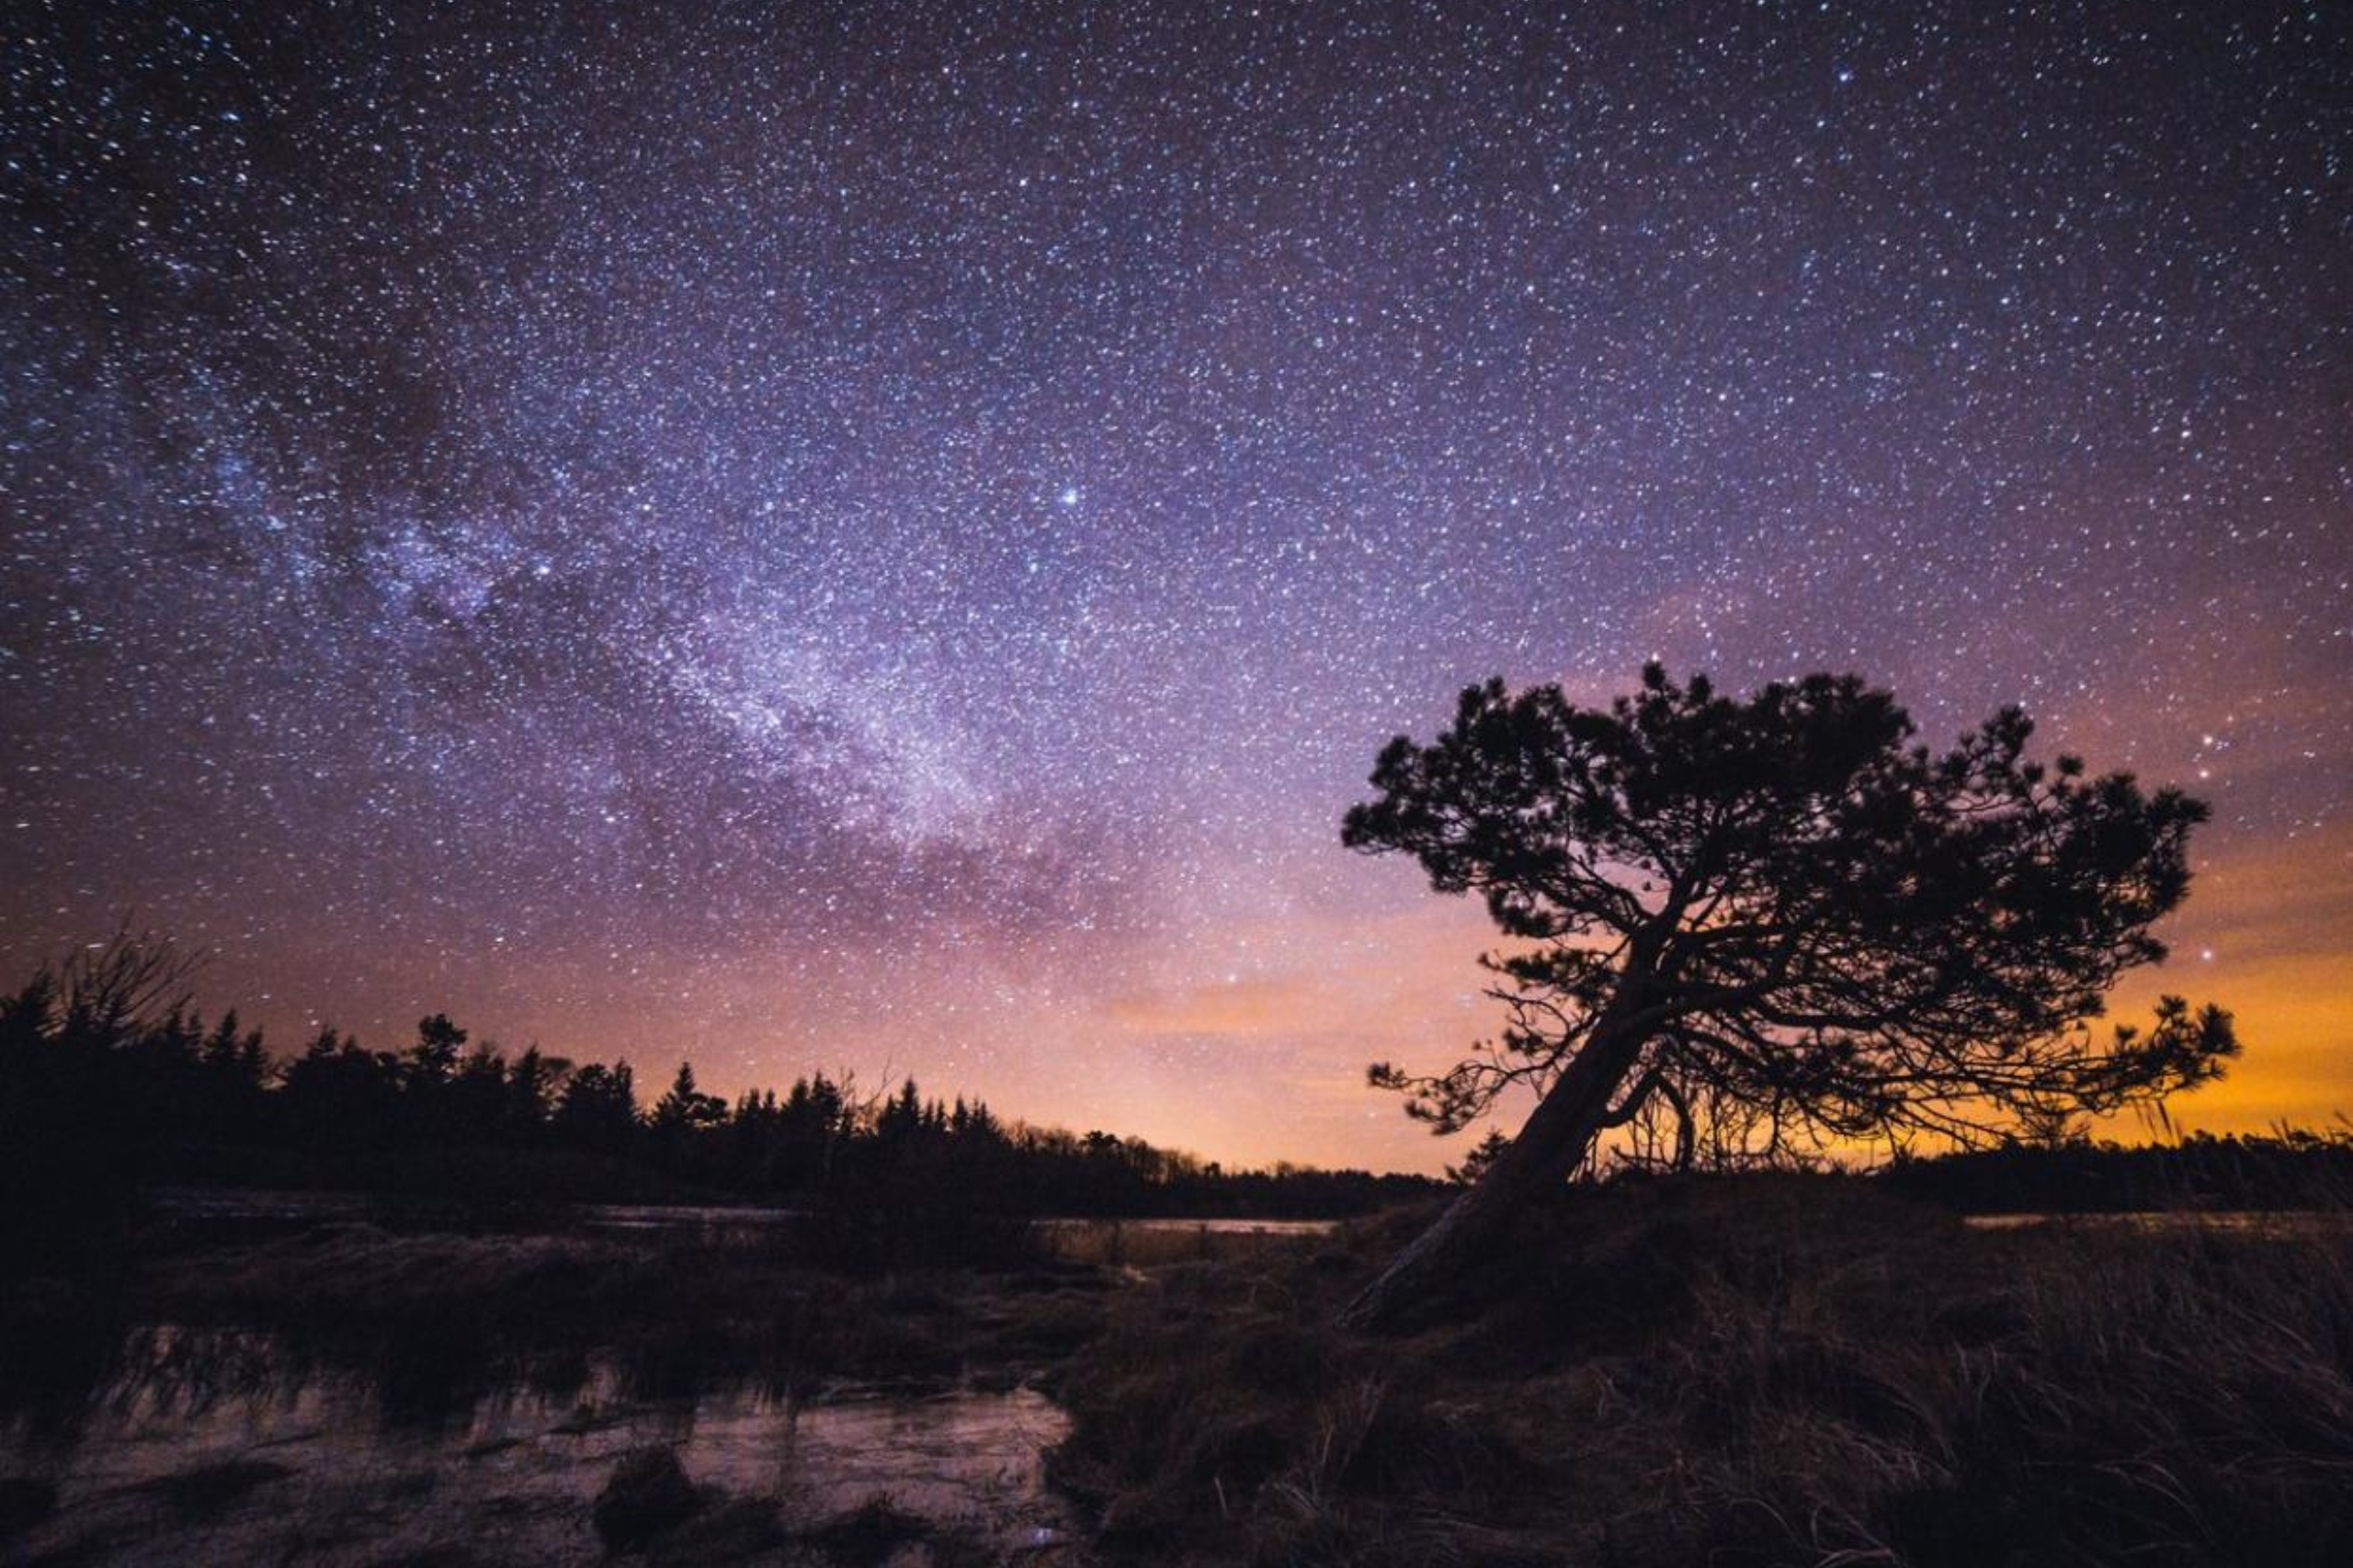 If you want to see such a breathtaking starry sky, you should stay a little longer in Thy national park after sunset. 